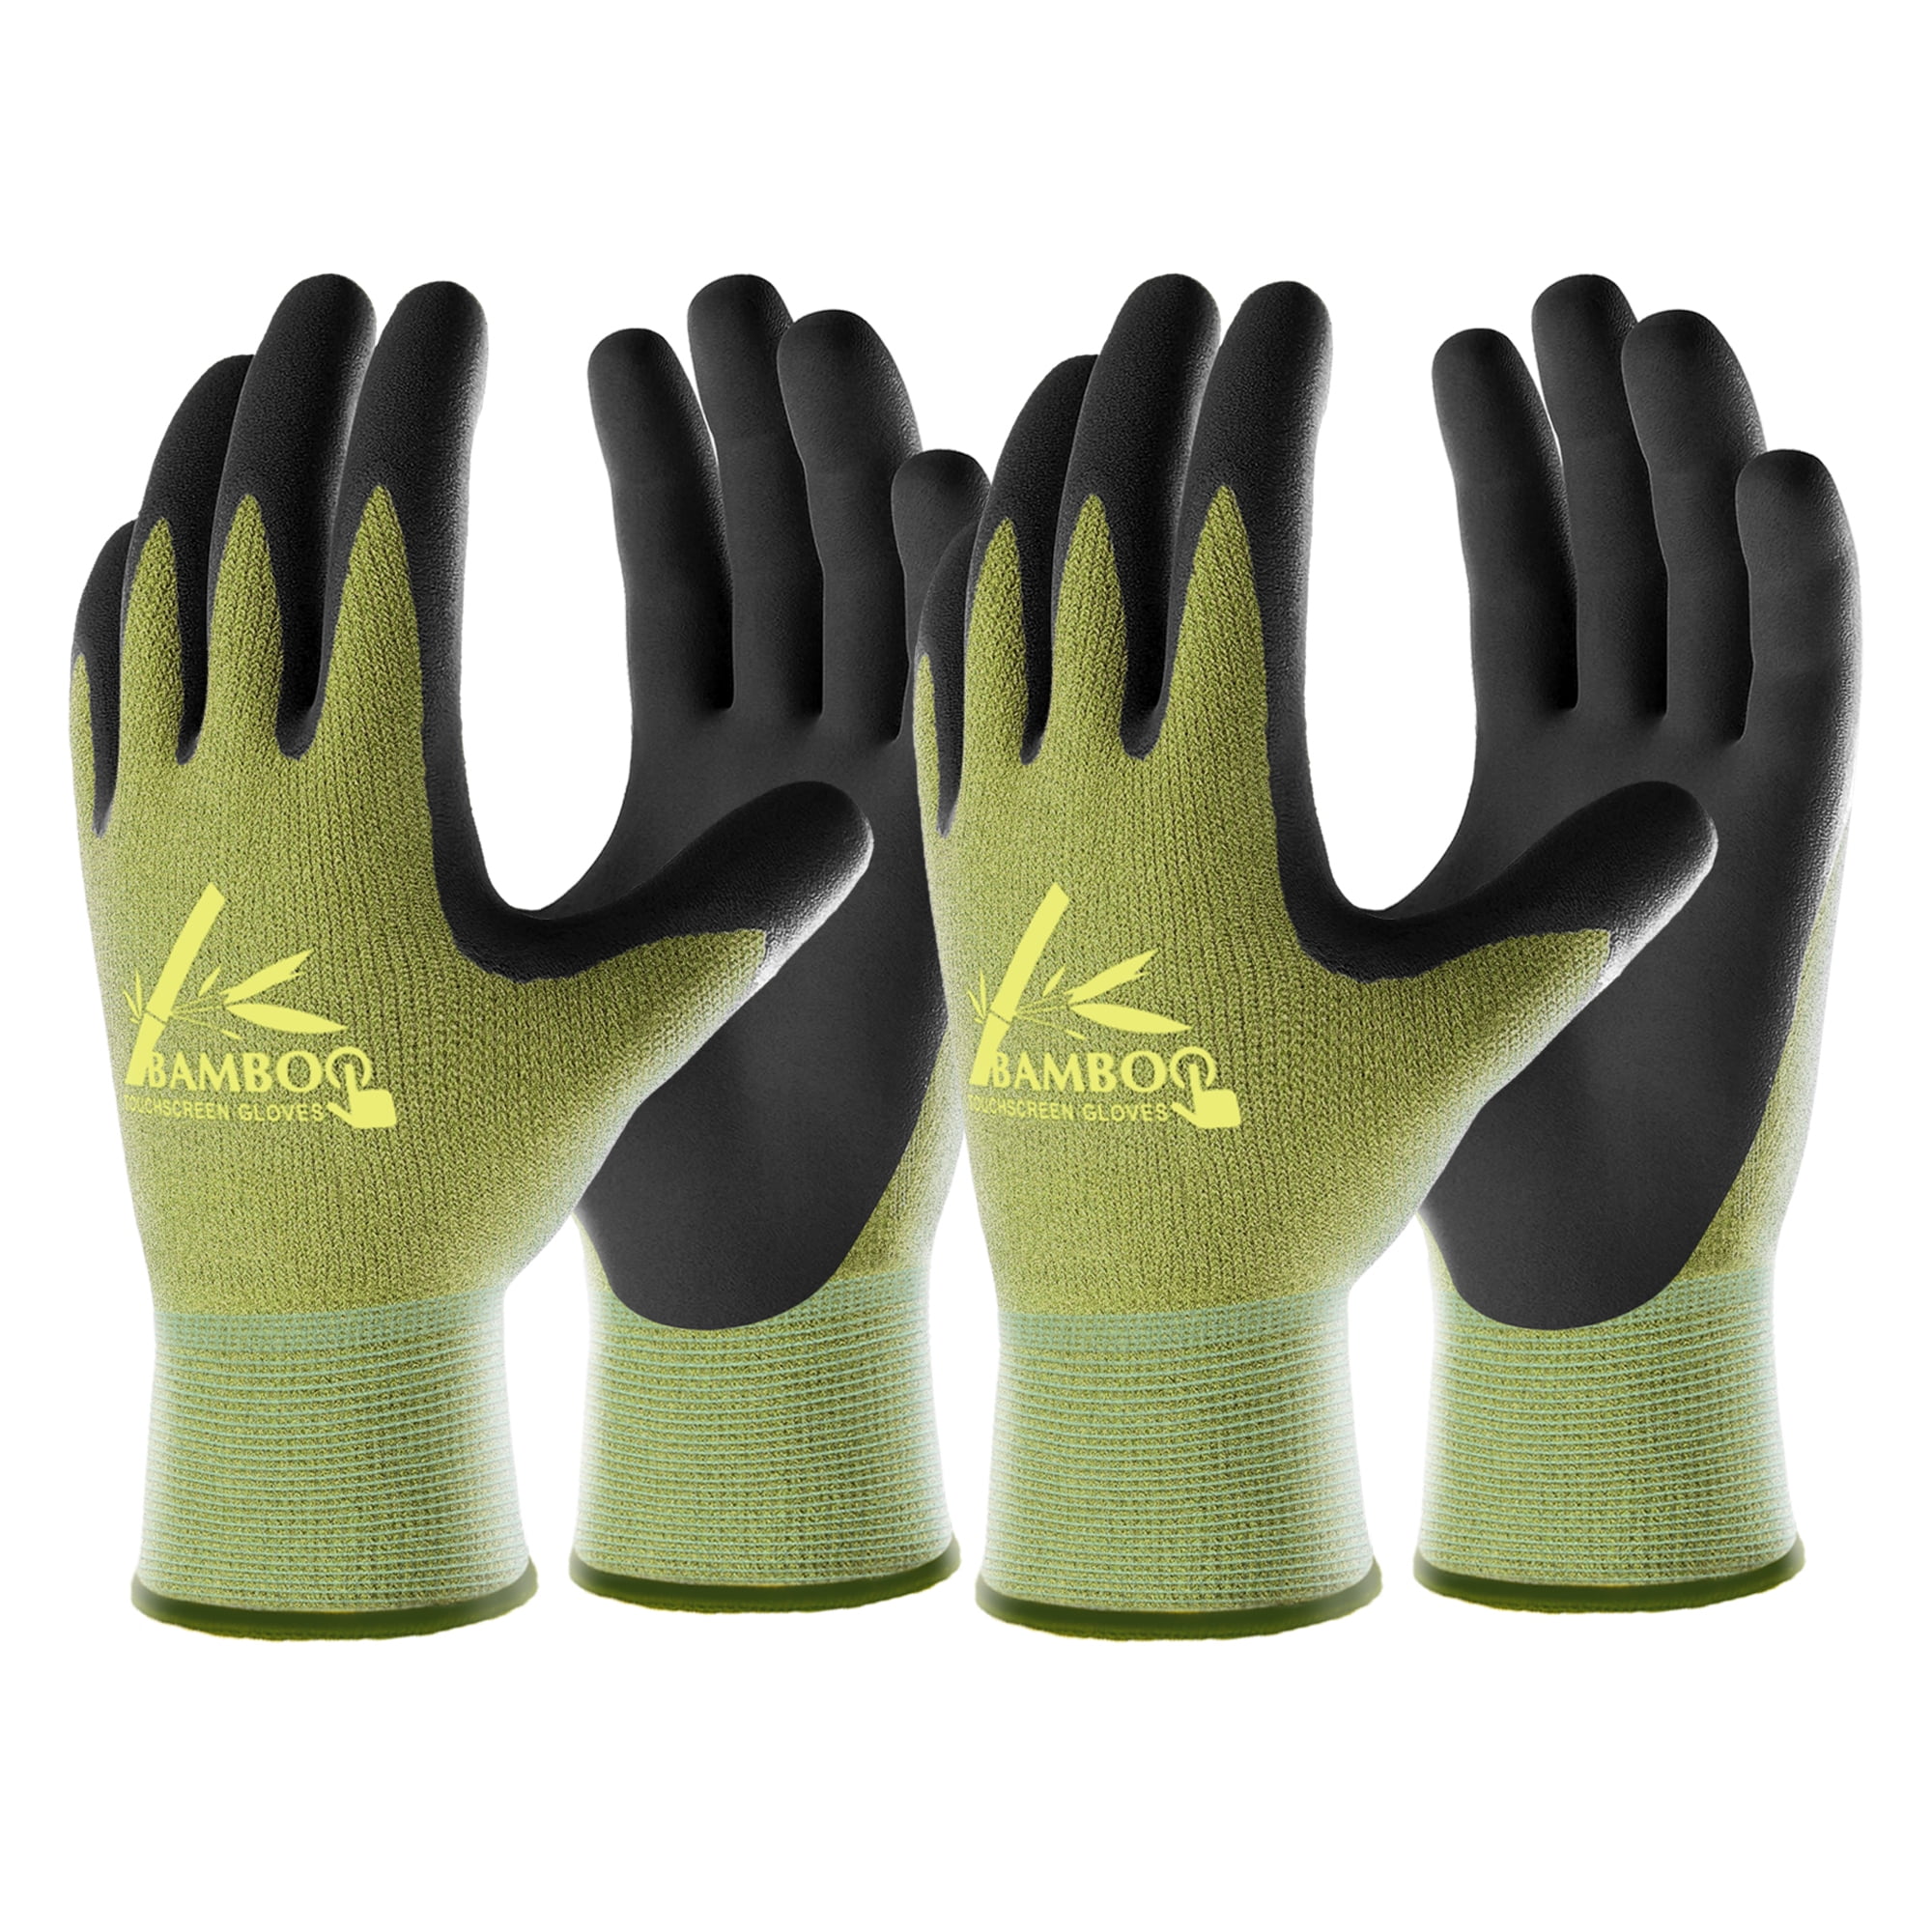 COOLJOB 2 Pairs Bamboo Touch Screen Gardening Gloves for Men and Women,  Small Breathable Working Gloves, Rubber Coated Garden Gloves, Non Slip Grip